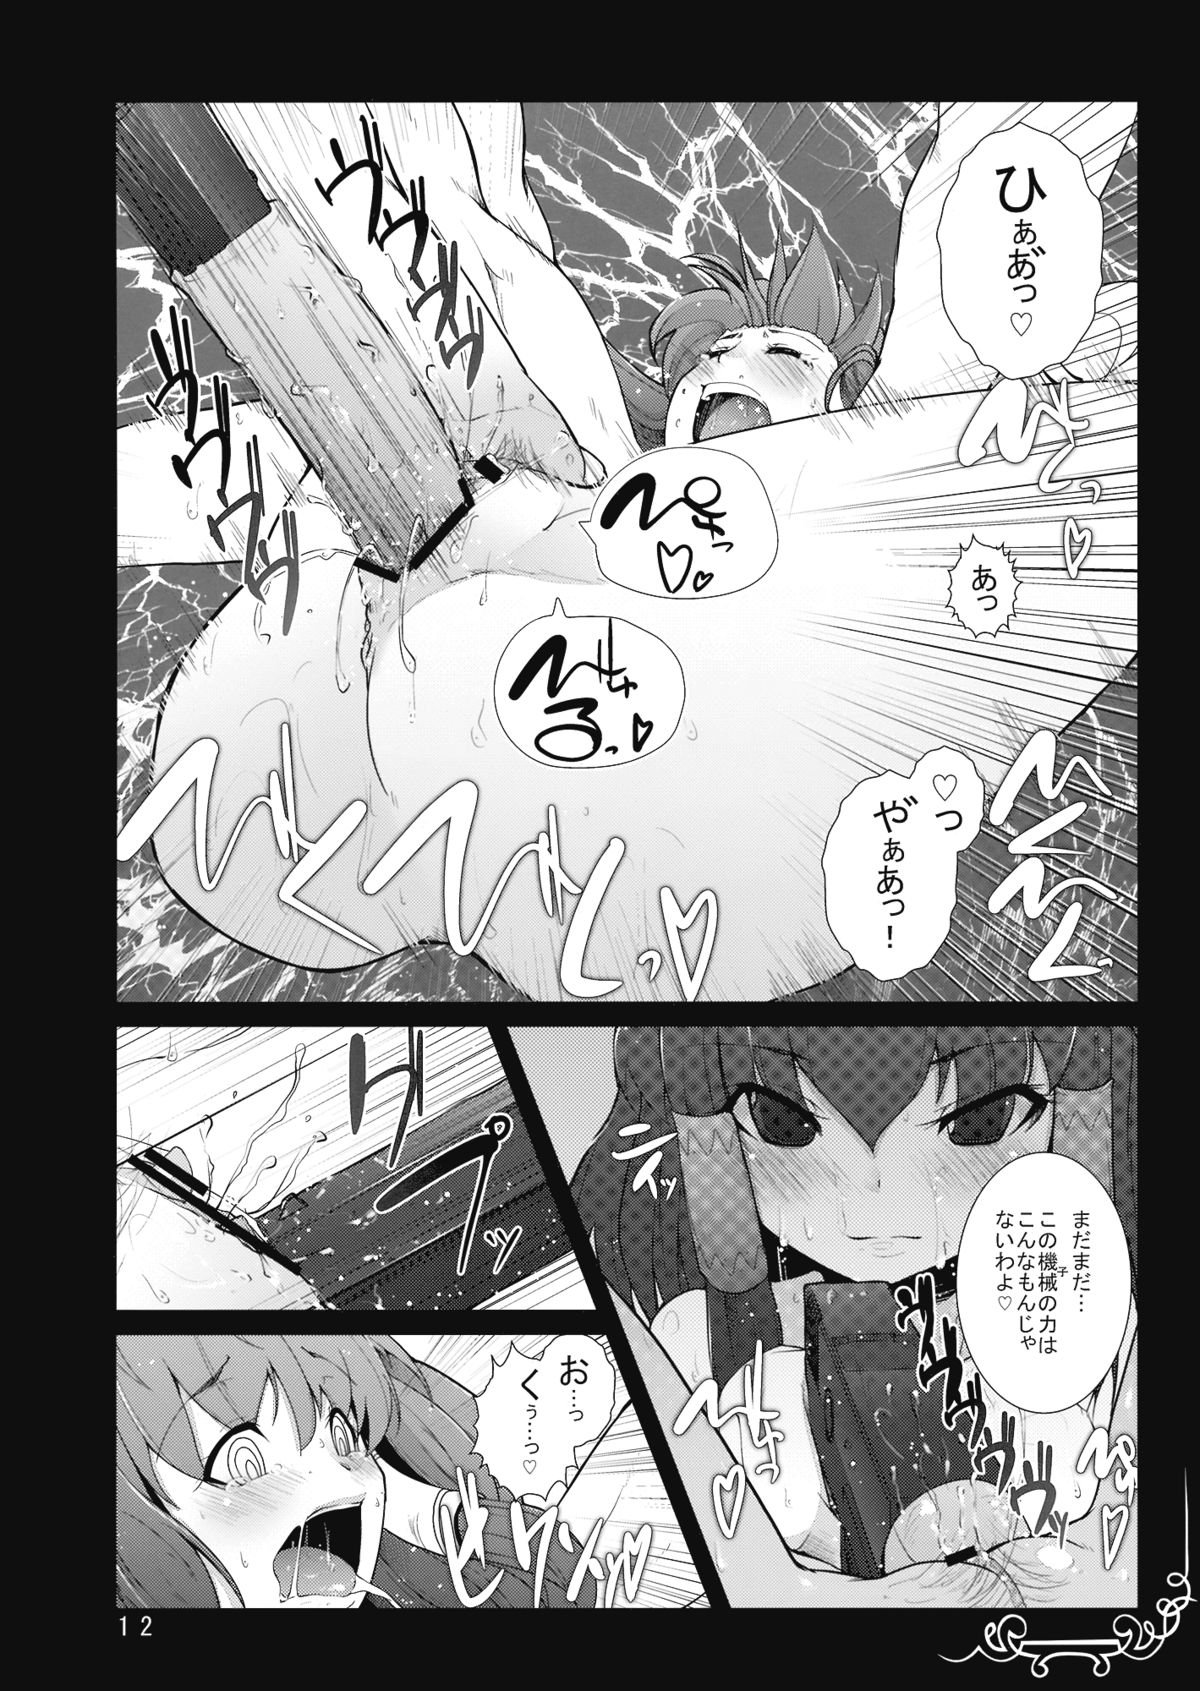 (C76) [Eclipse (Rougetu)] Vacillate (Touhou Project) page 12 full